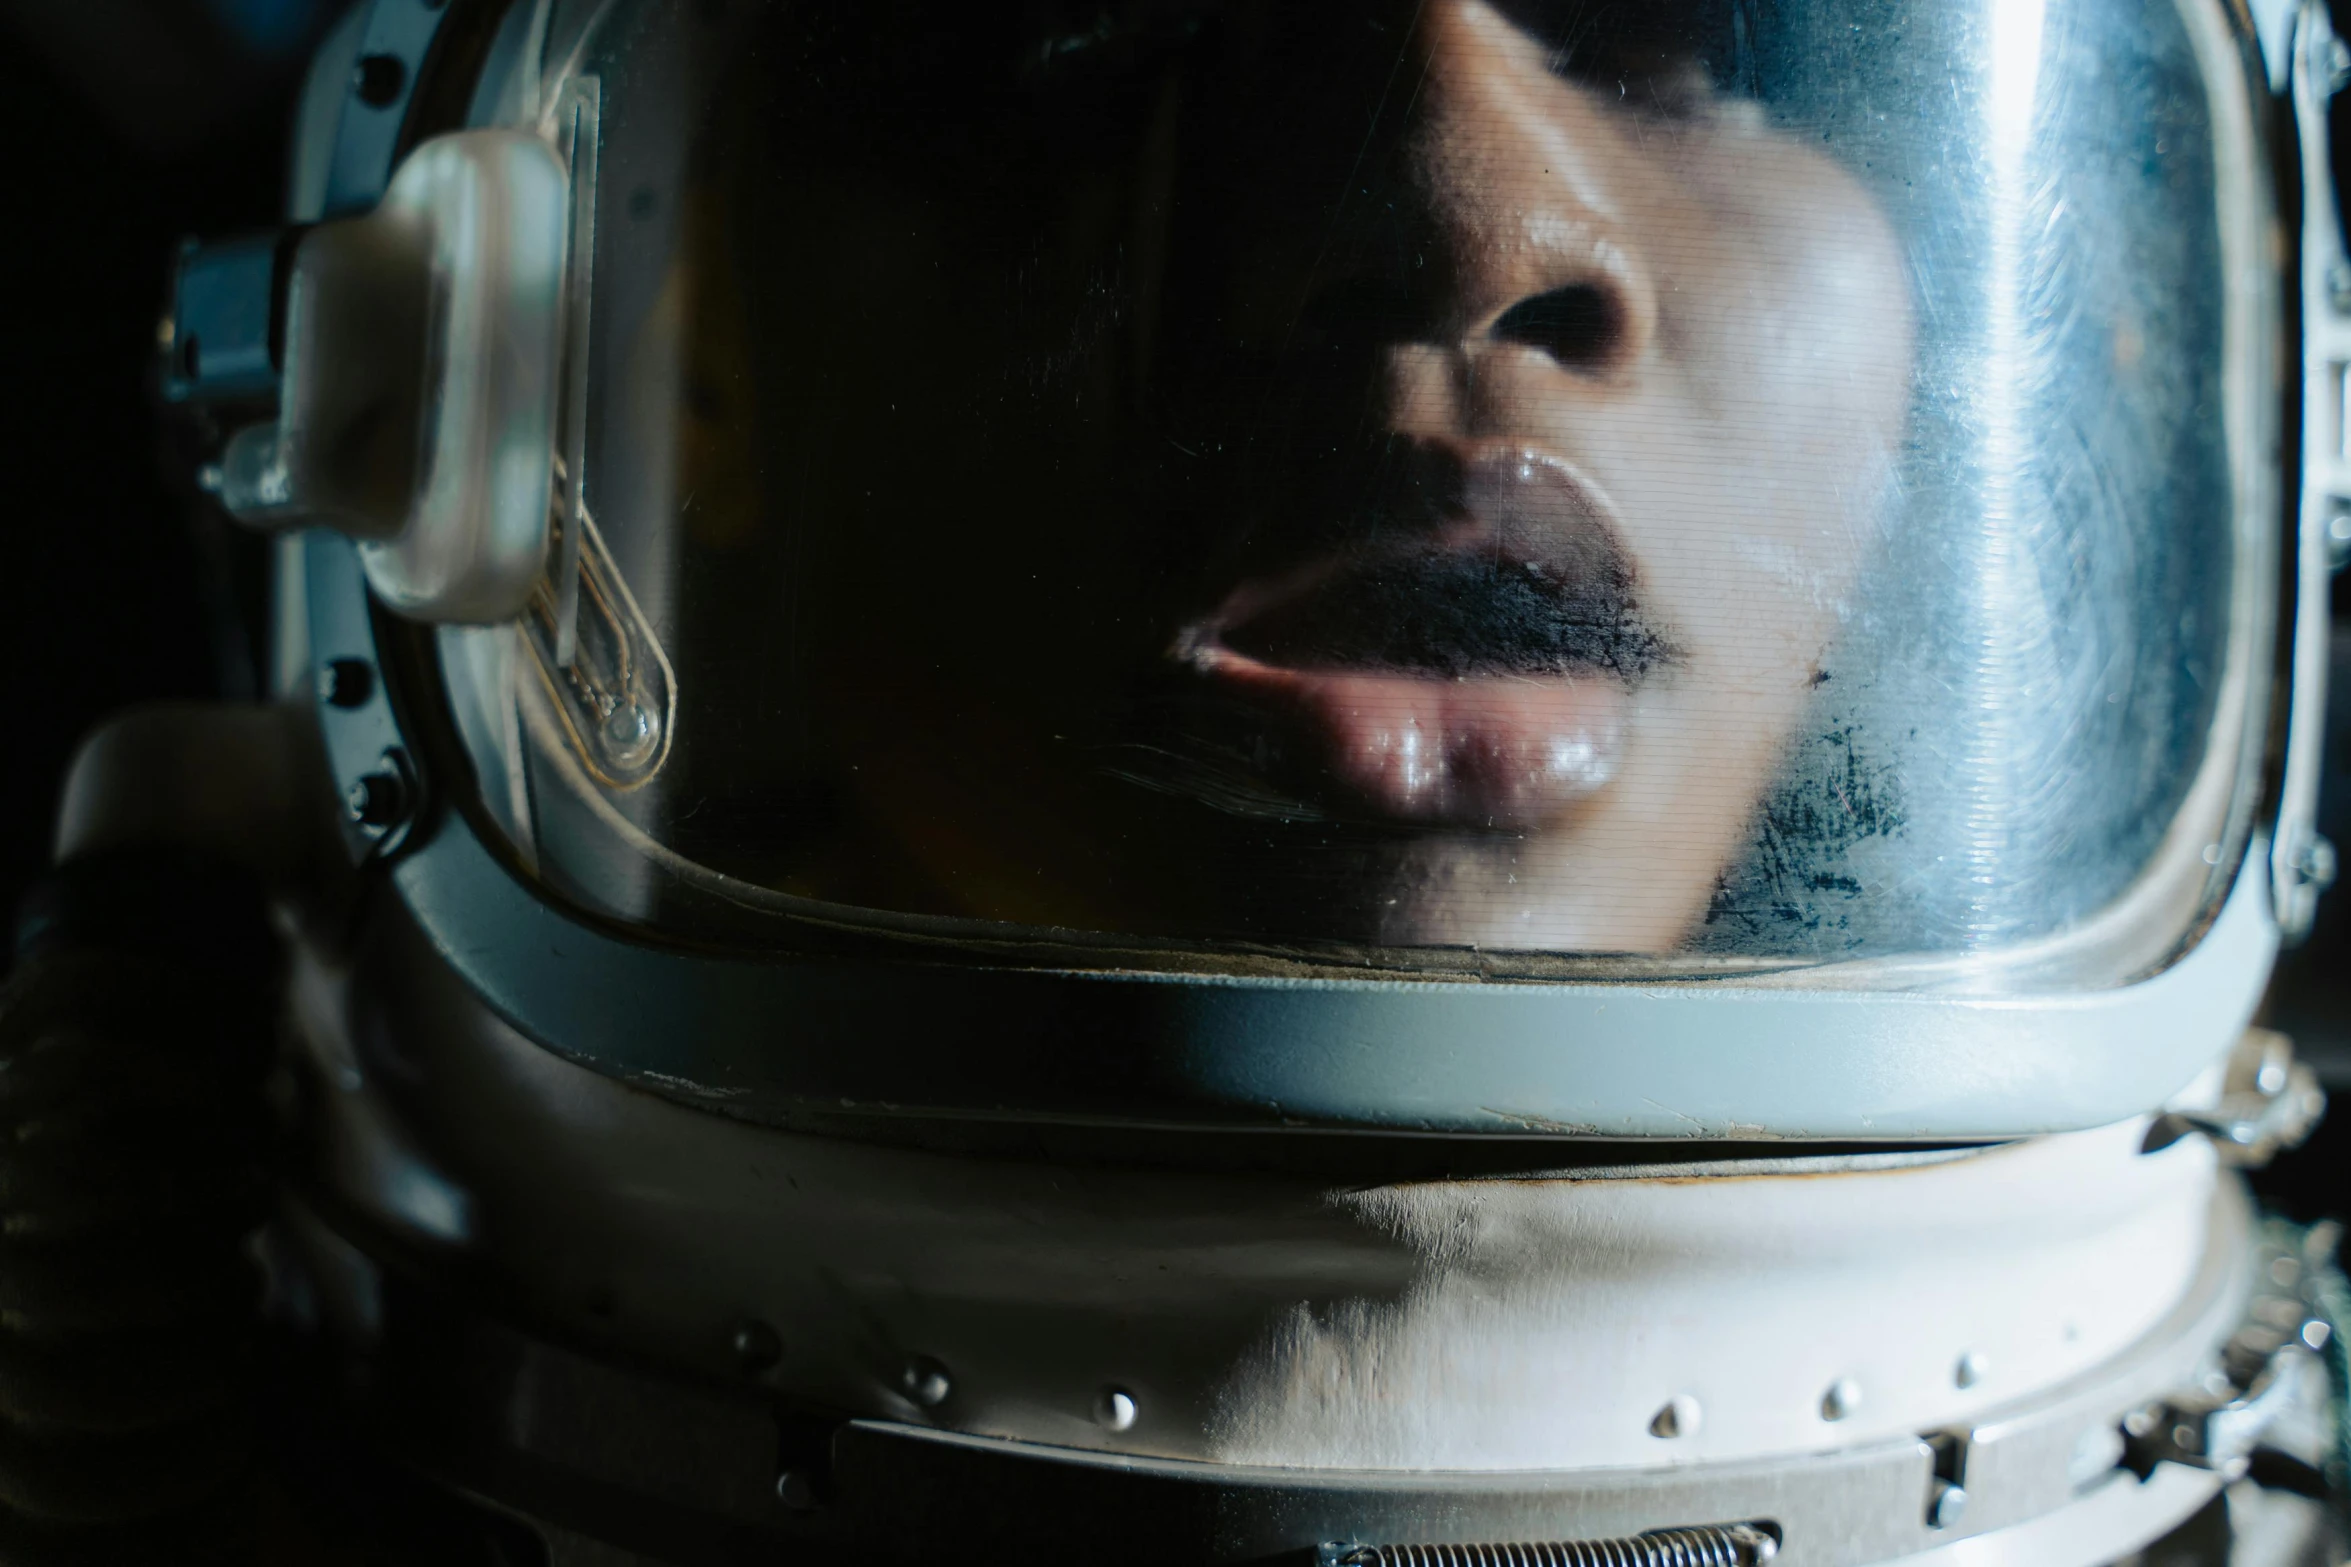 a close up of a person wearing a space suit, pexels contest winner, afrofuturism, imax movie still, reflecting, full frontal shot, woman astronaut